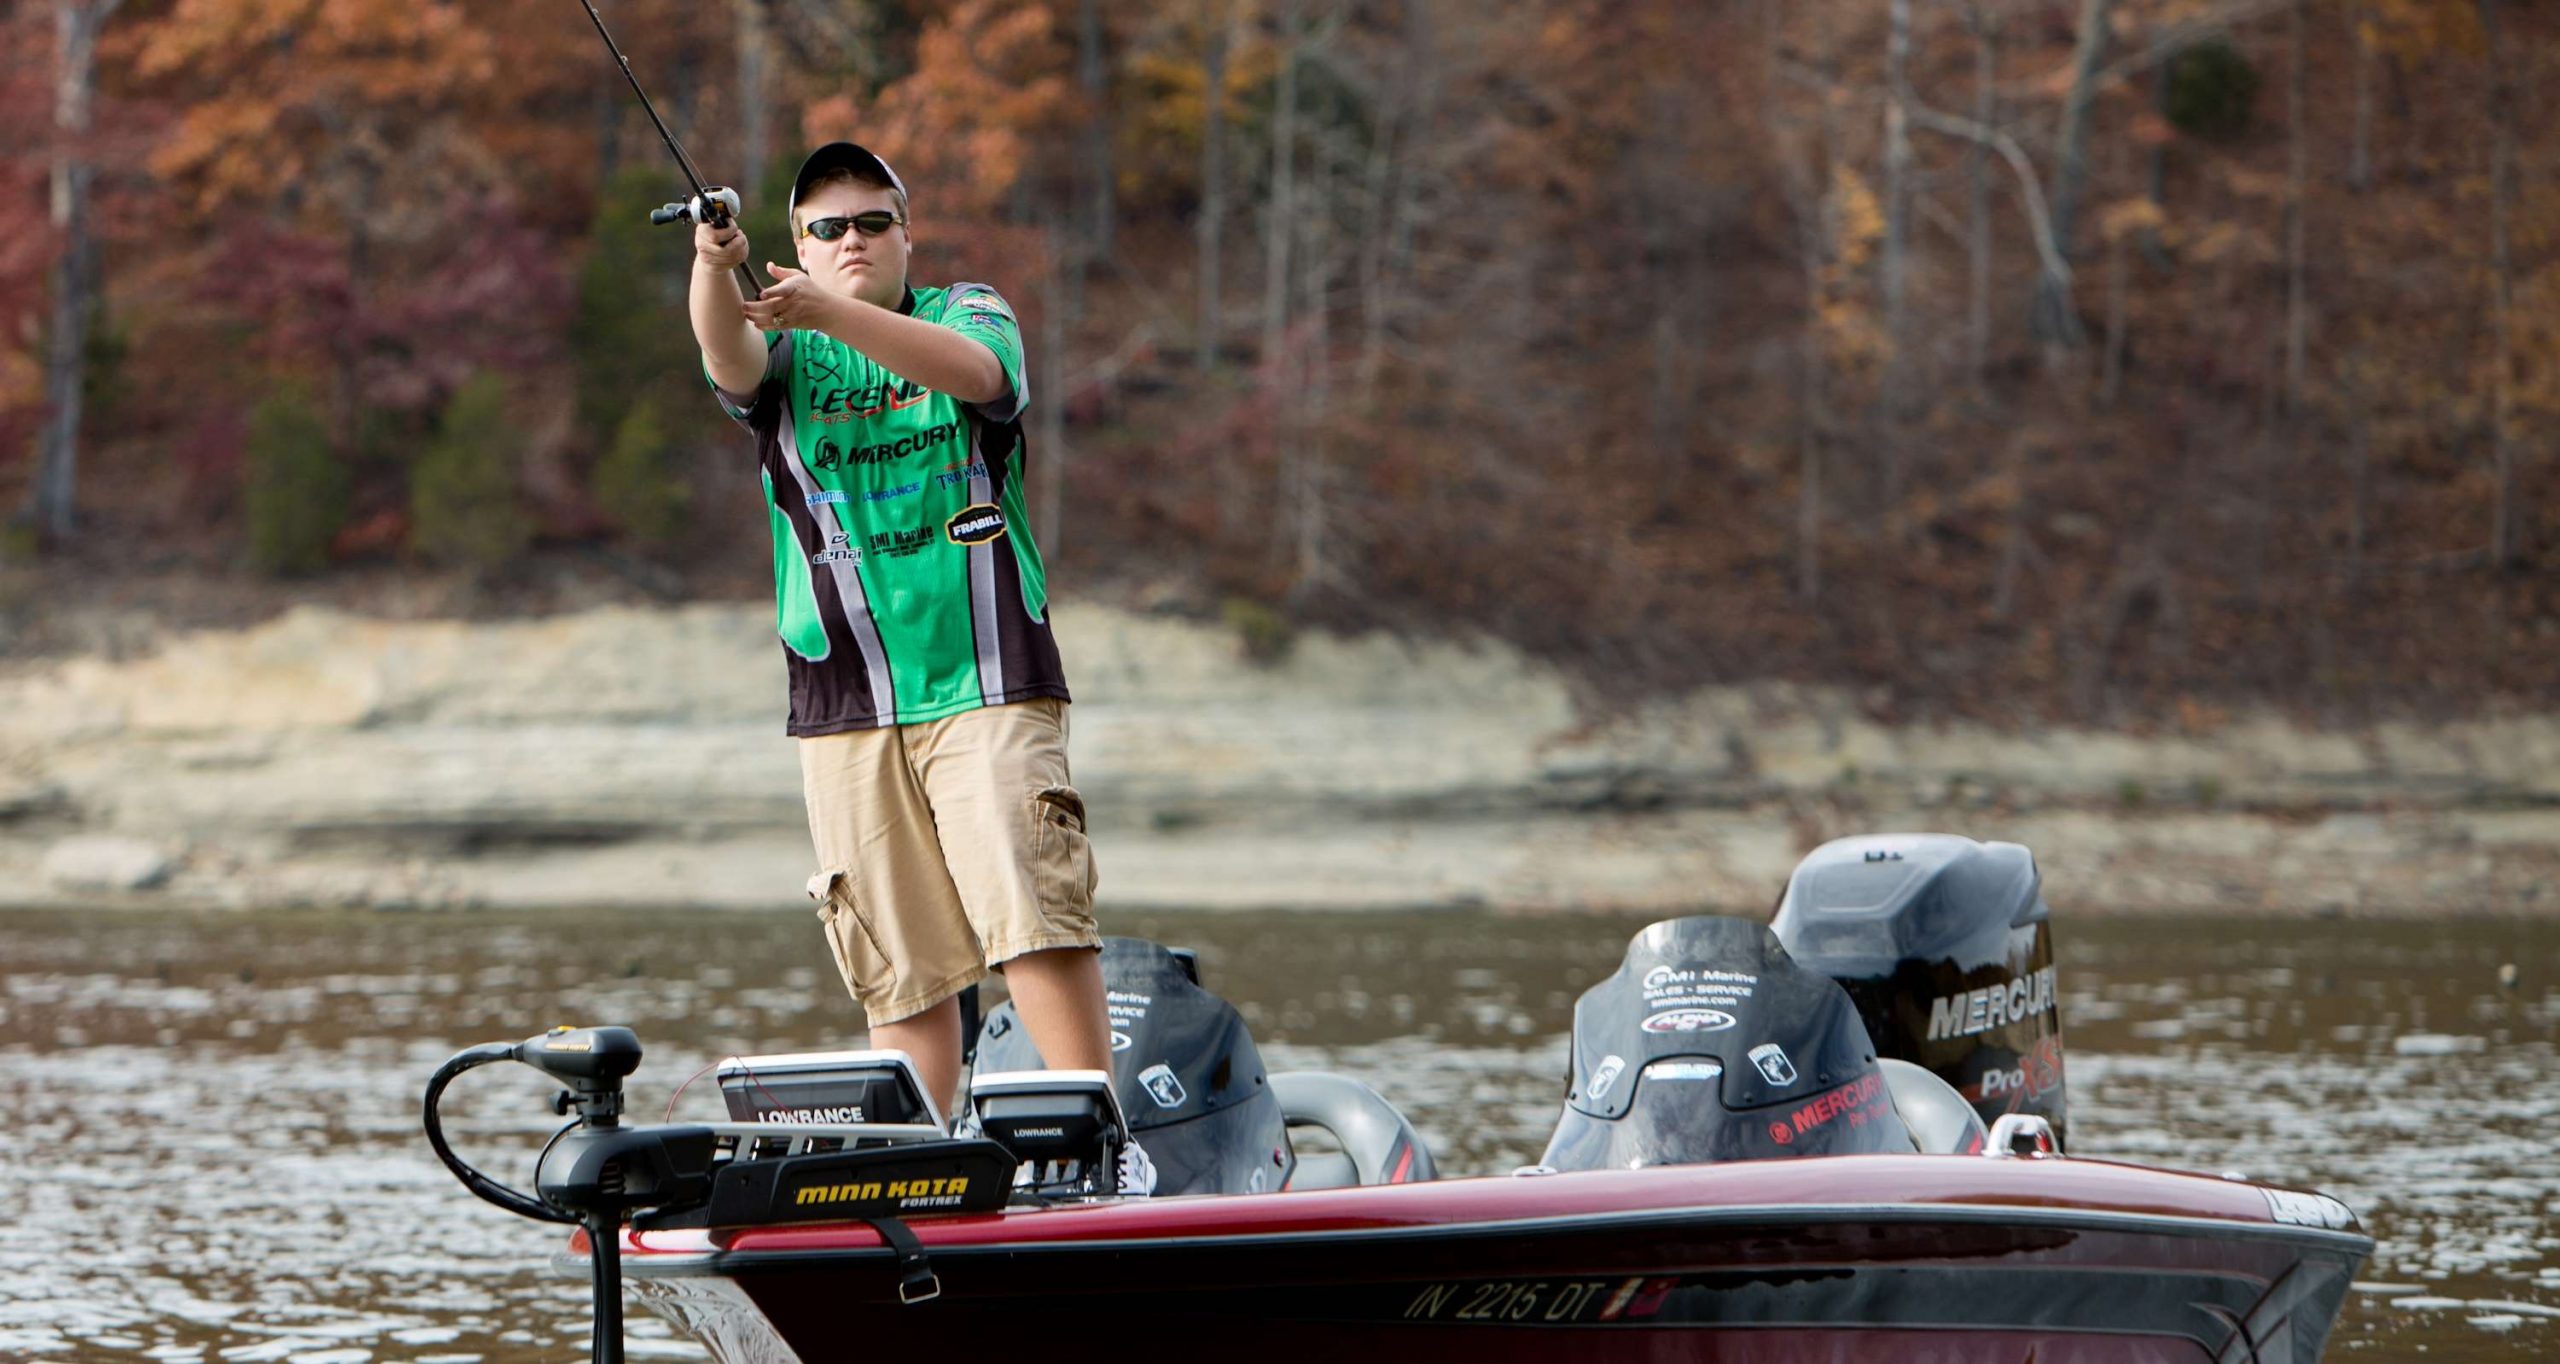 <b>Indiana: Jordan Mullis</b><br>
Mullis is a senior from Bloomington, Ind., and fishes for the Southside Anglers. Mullis has earned four wins and six Top 5 finishes. He will compete for the second year at the Costa Bassmaster High School National Championshi[ in 2016.
